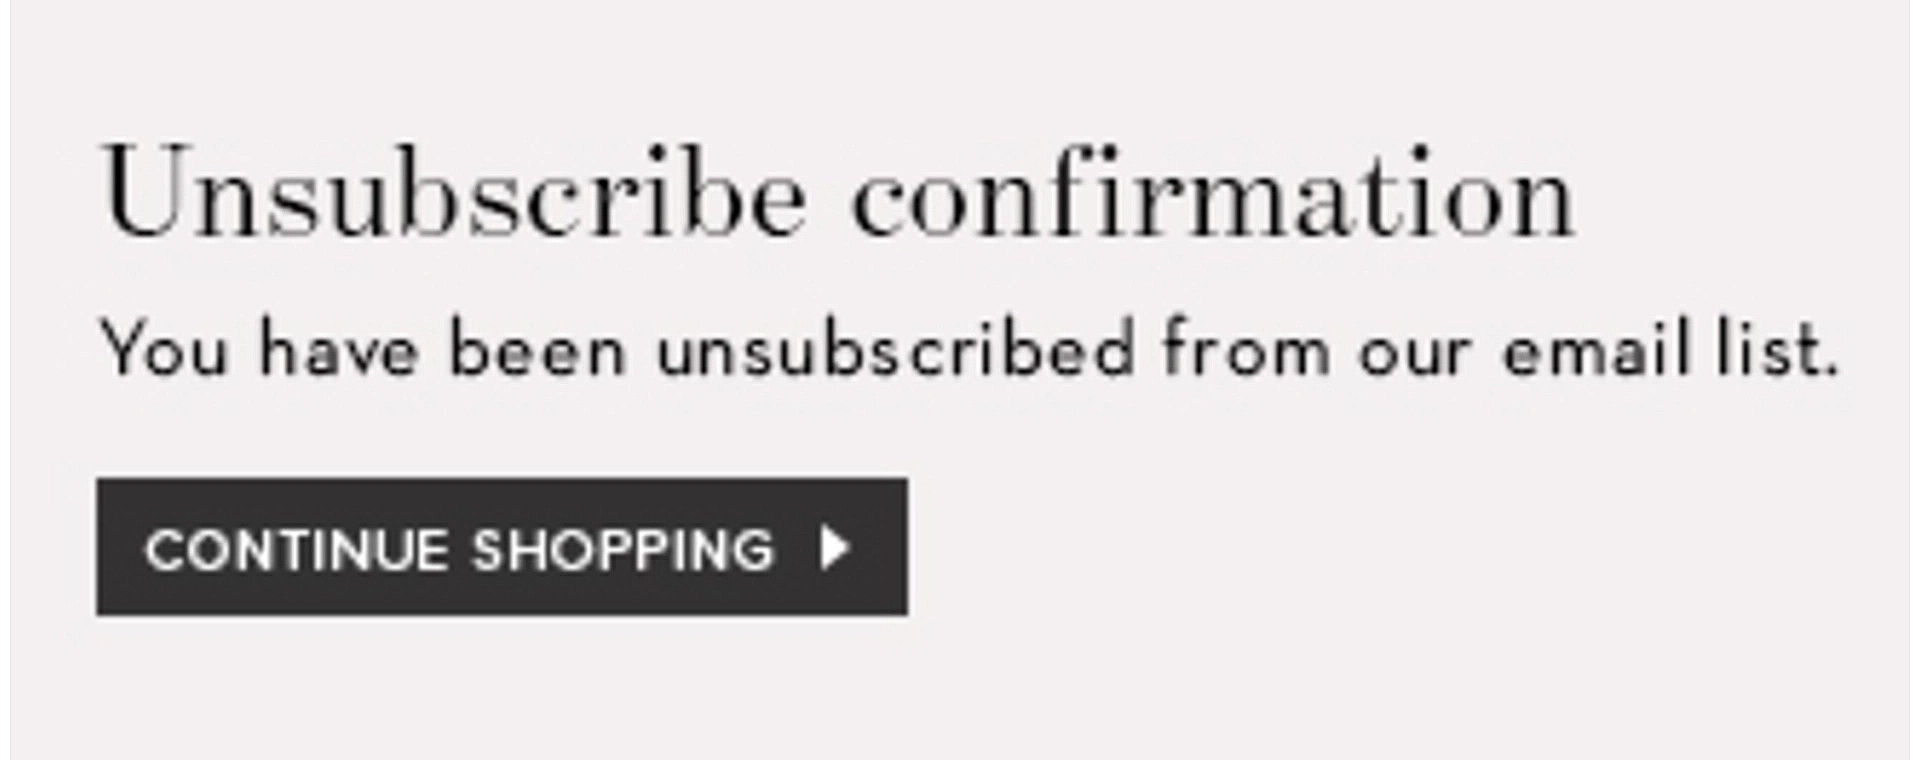 You have been unsubscribed from our email list. Continue Shopping